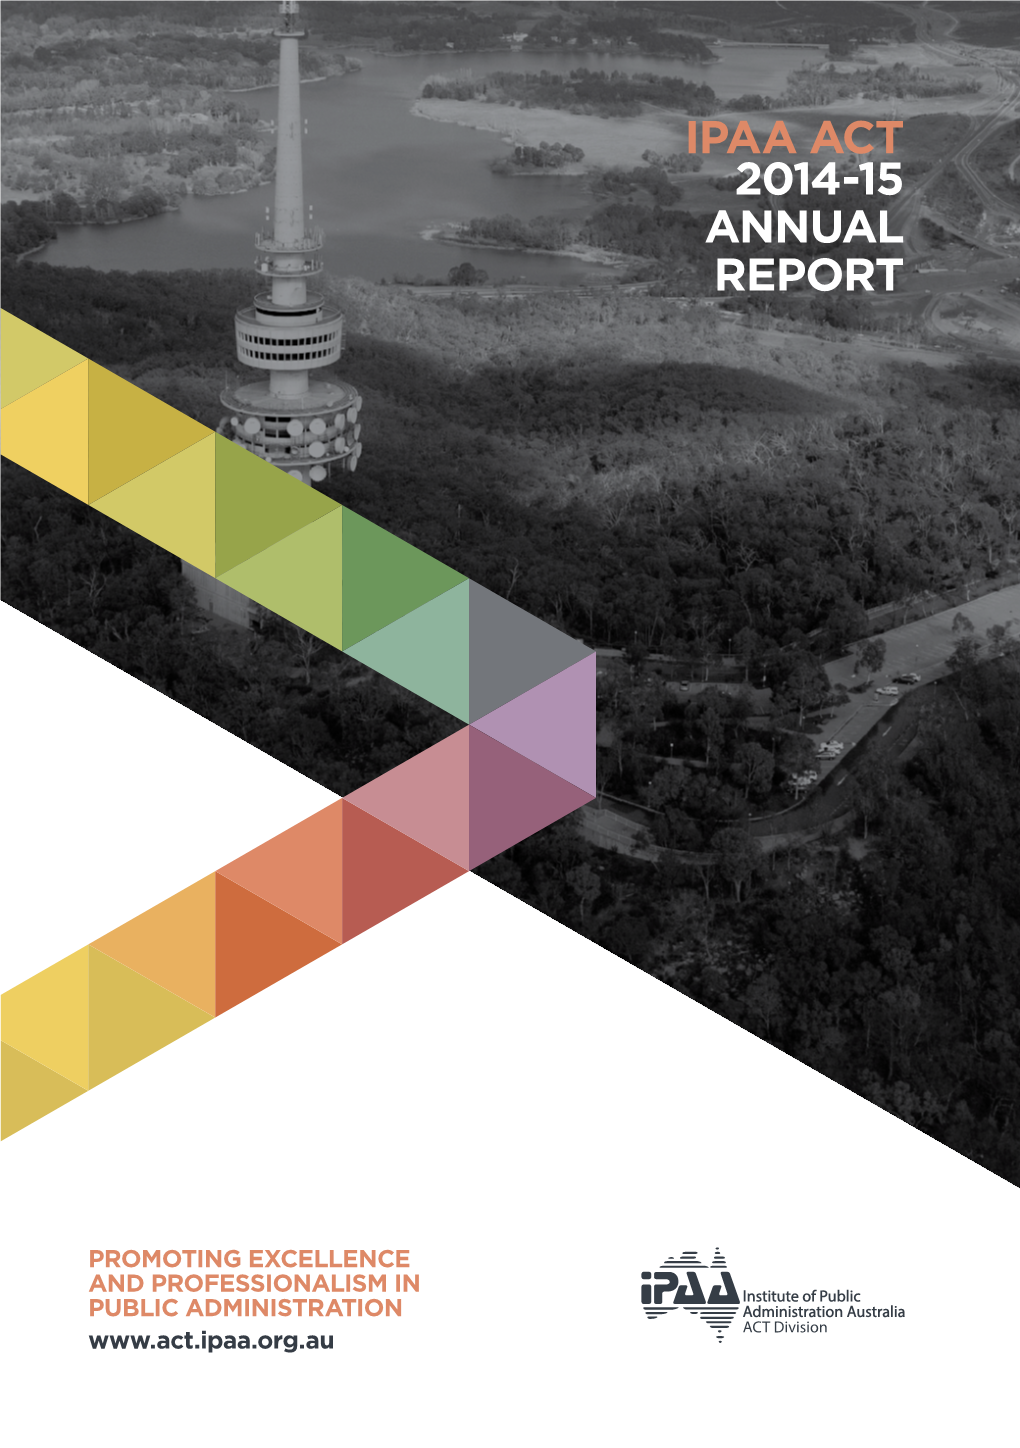 Ipaa Act 2014-15 Annual Report